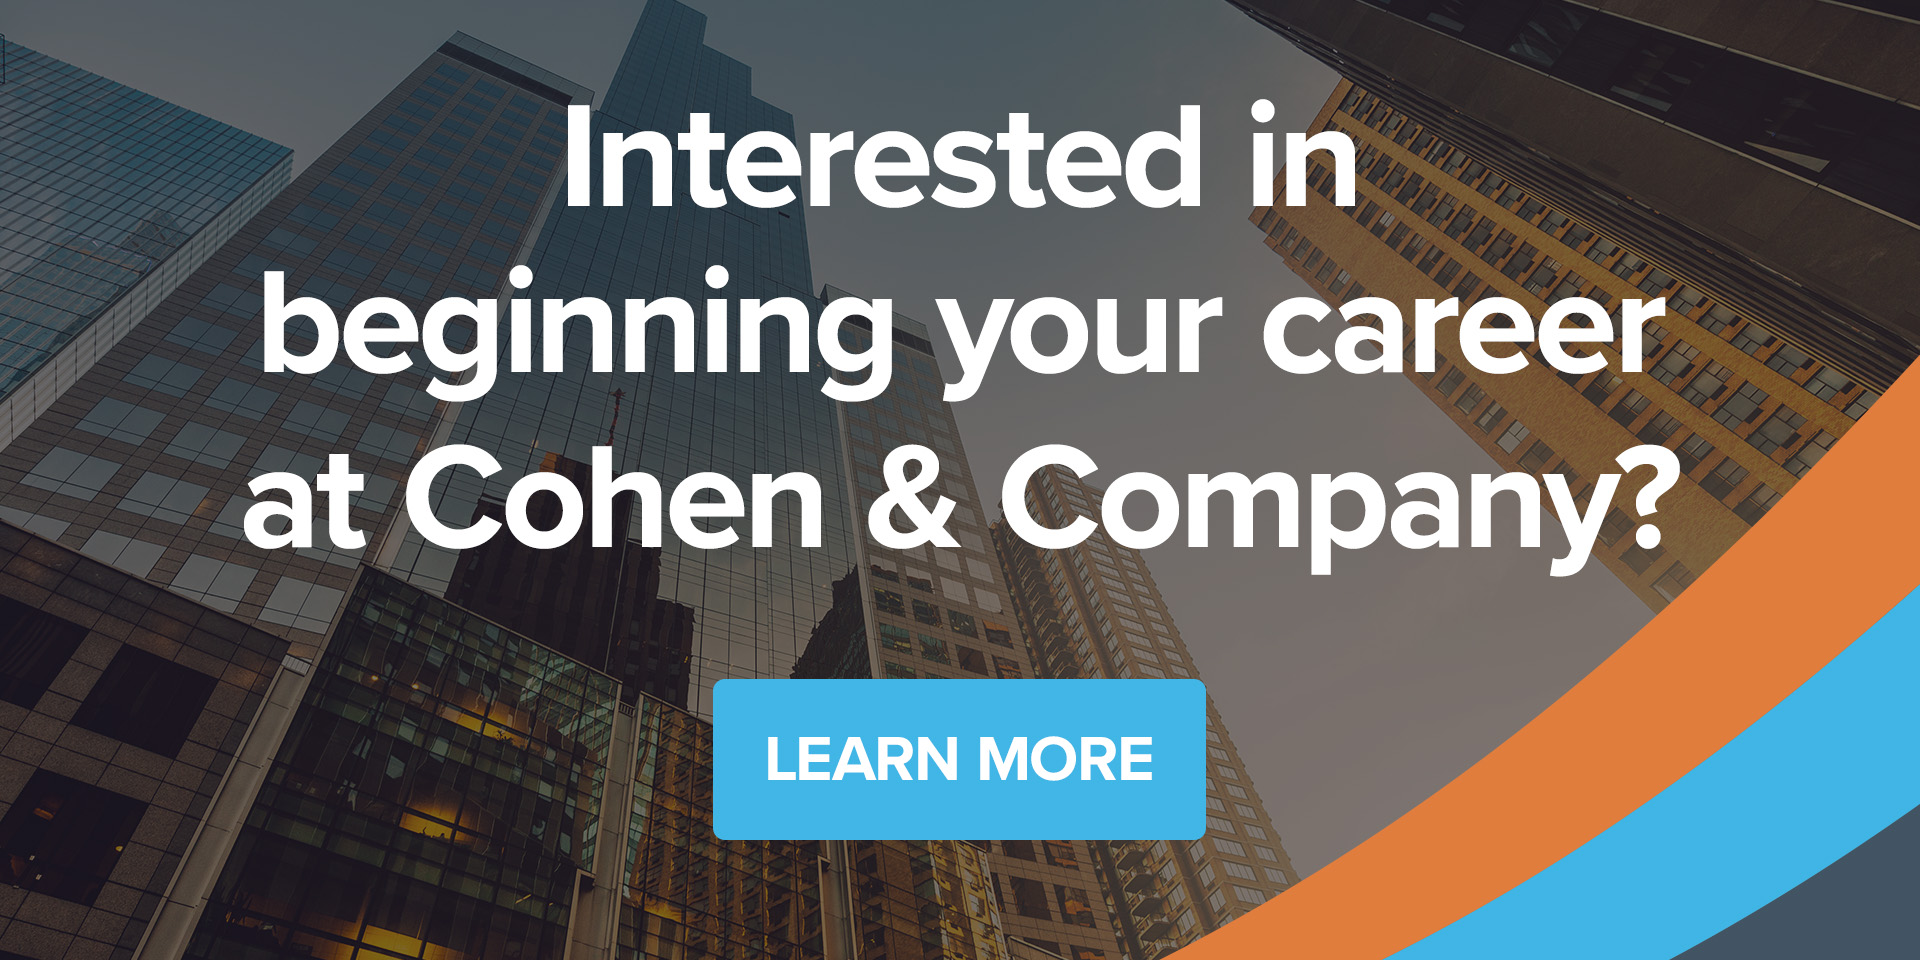 Interested in beginning your career at Cohen & Company? Learn more.